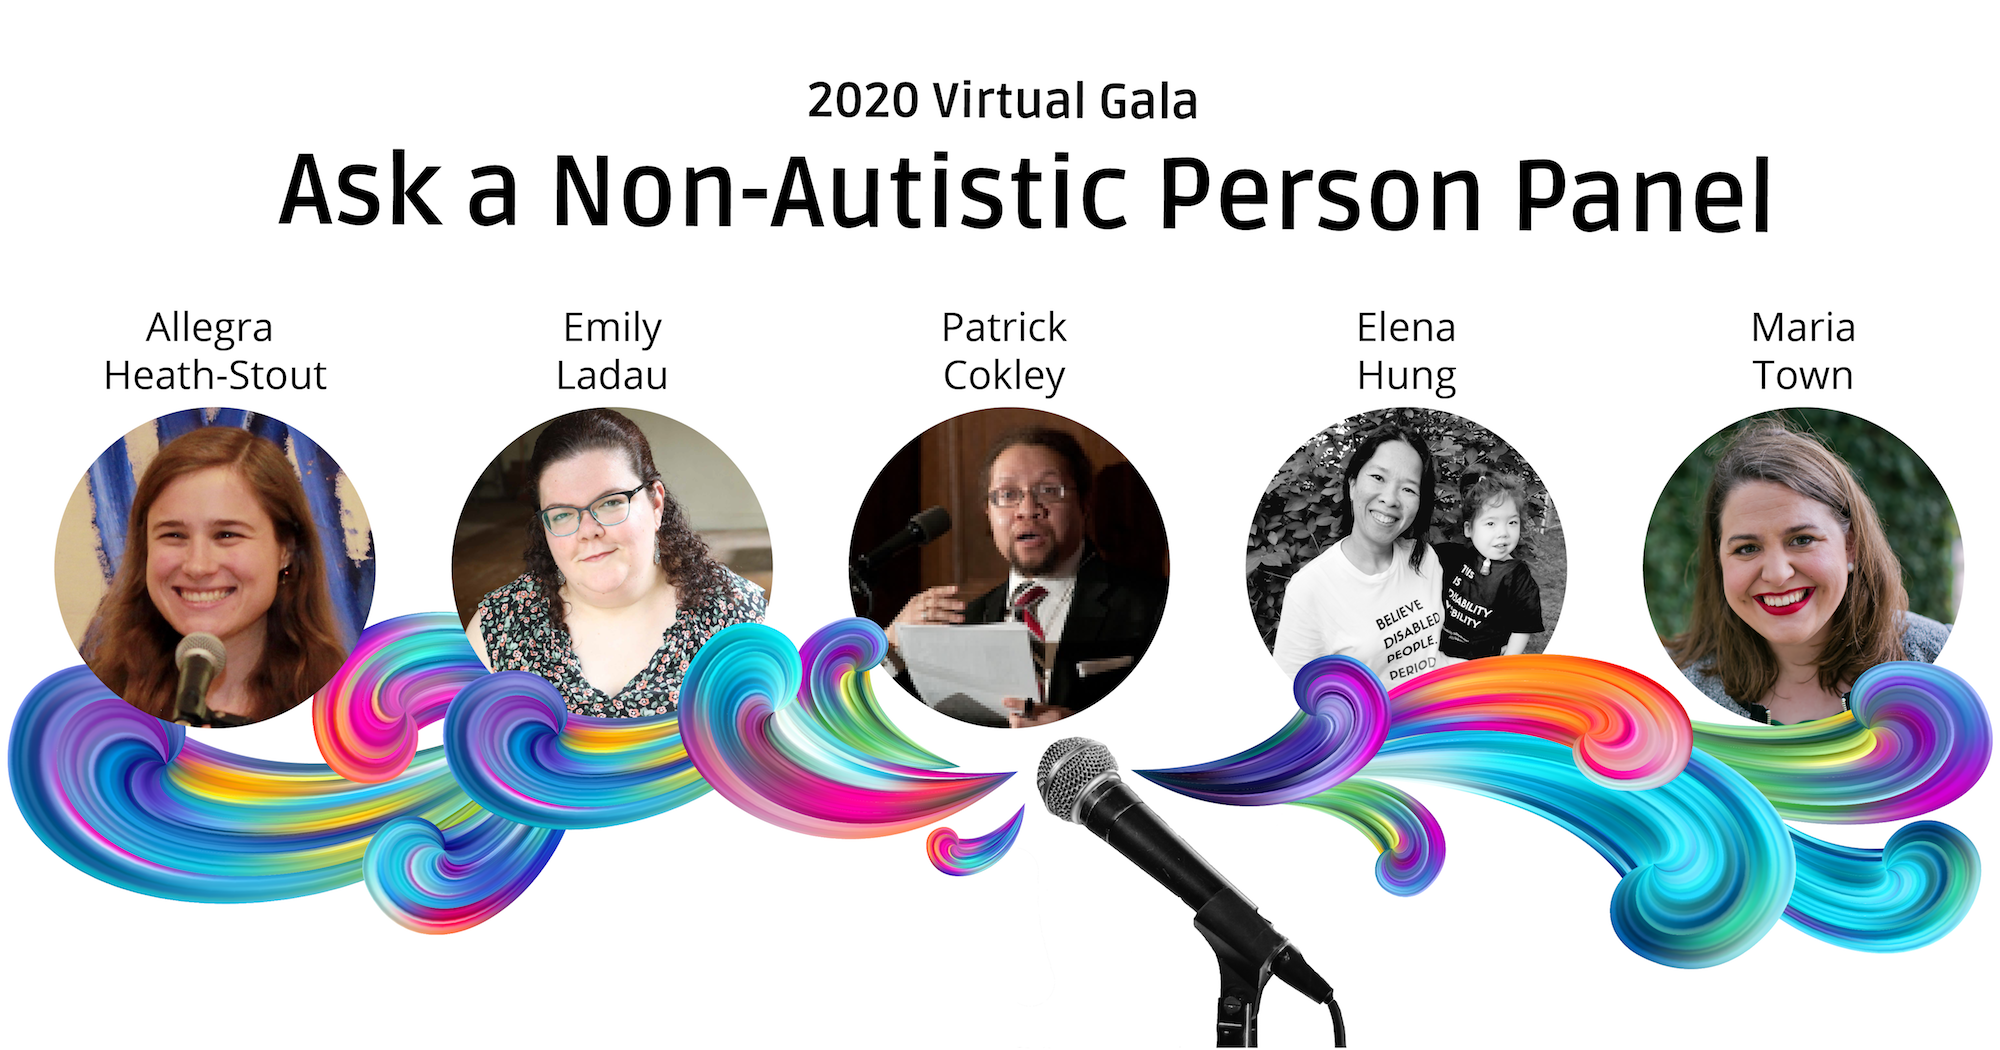 Colorful swirls come from a microphone underneath photos of the panelists. Their names are above their photos, from left to right: Allegra Heath-Stout, Emily Ladau, Patrick Cokley, Elena Hung, and Maria Town. Text at the top reads “2020 Virtual Gala” and “Ask a Non-Autistic Person Panel.”